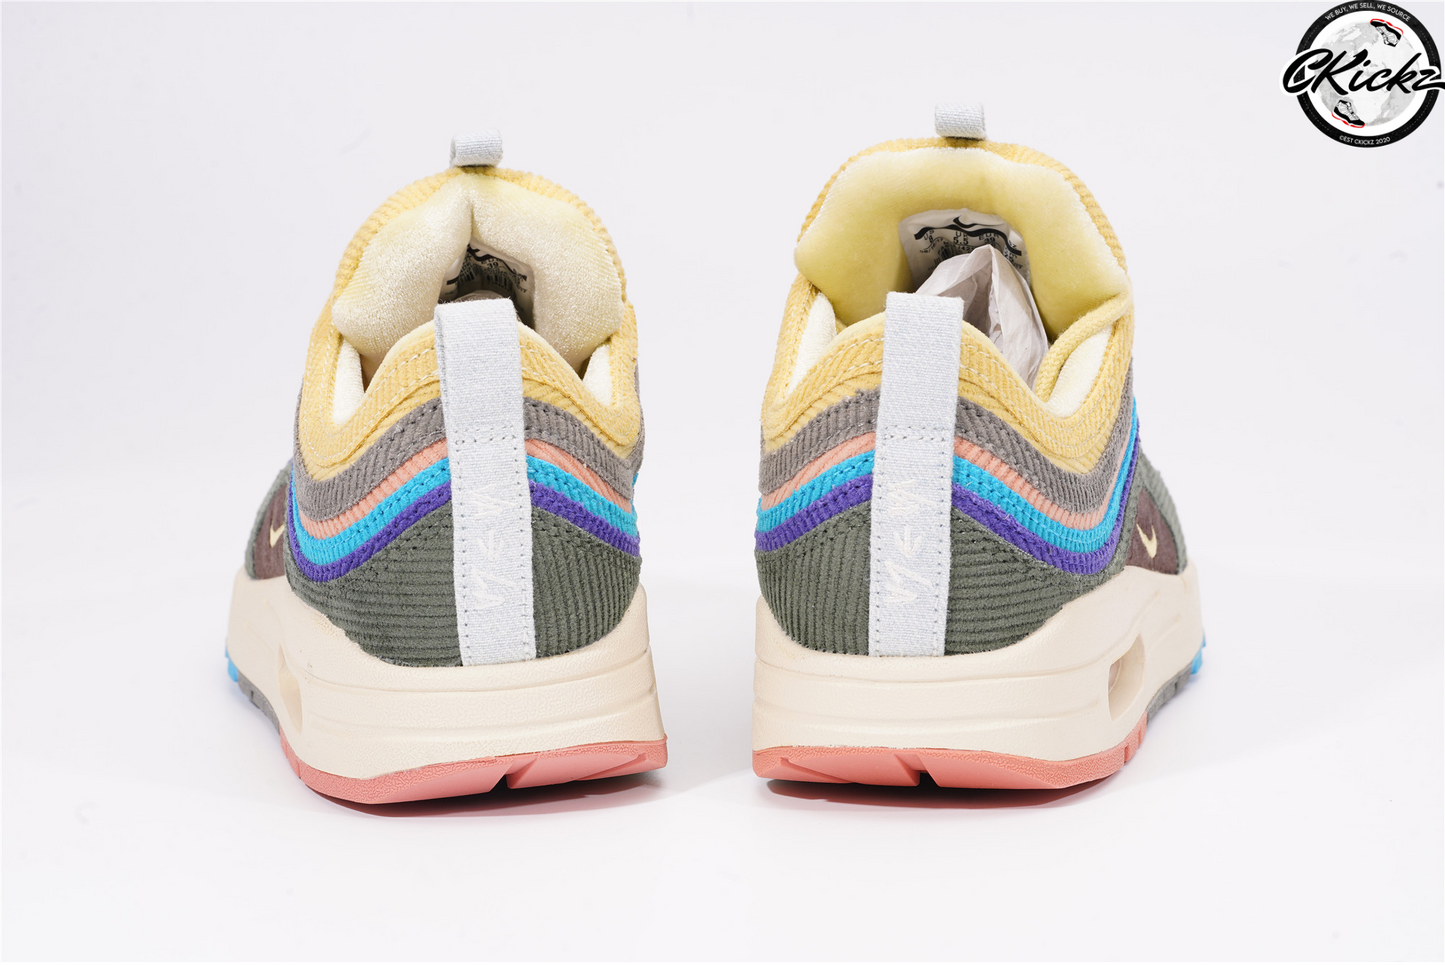 AM 1-97 x Sean Wotherspoon